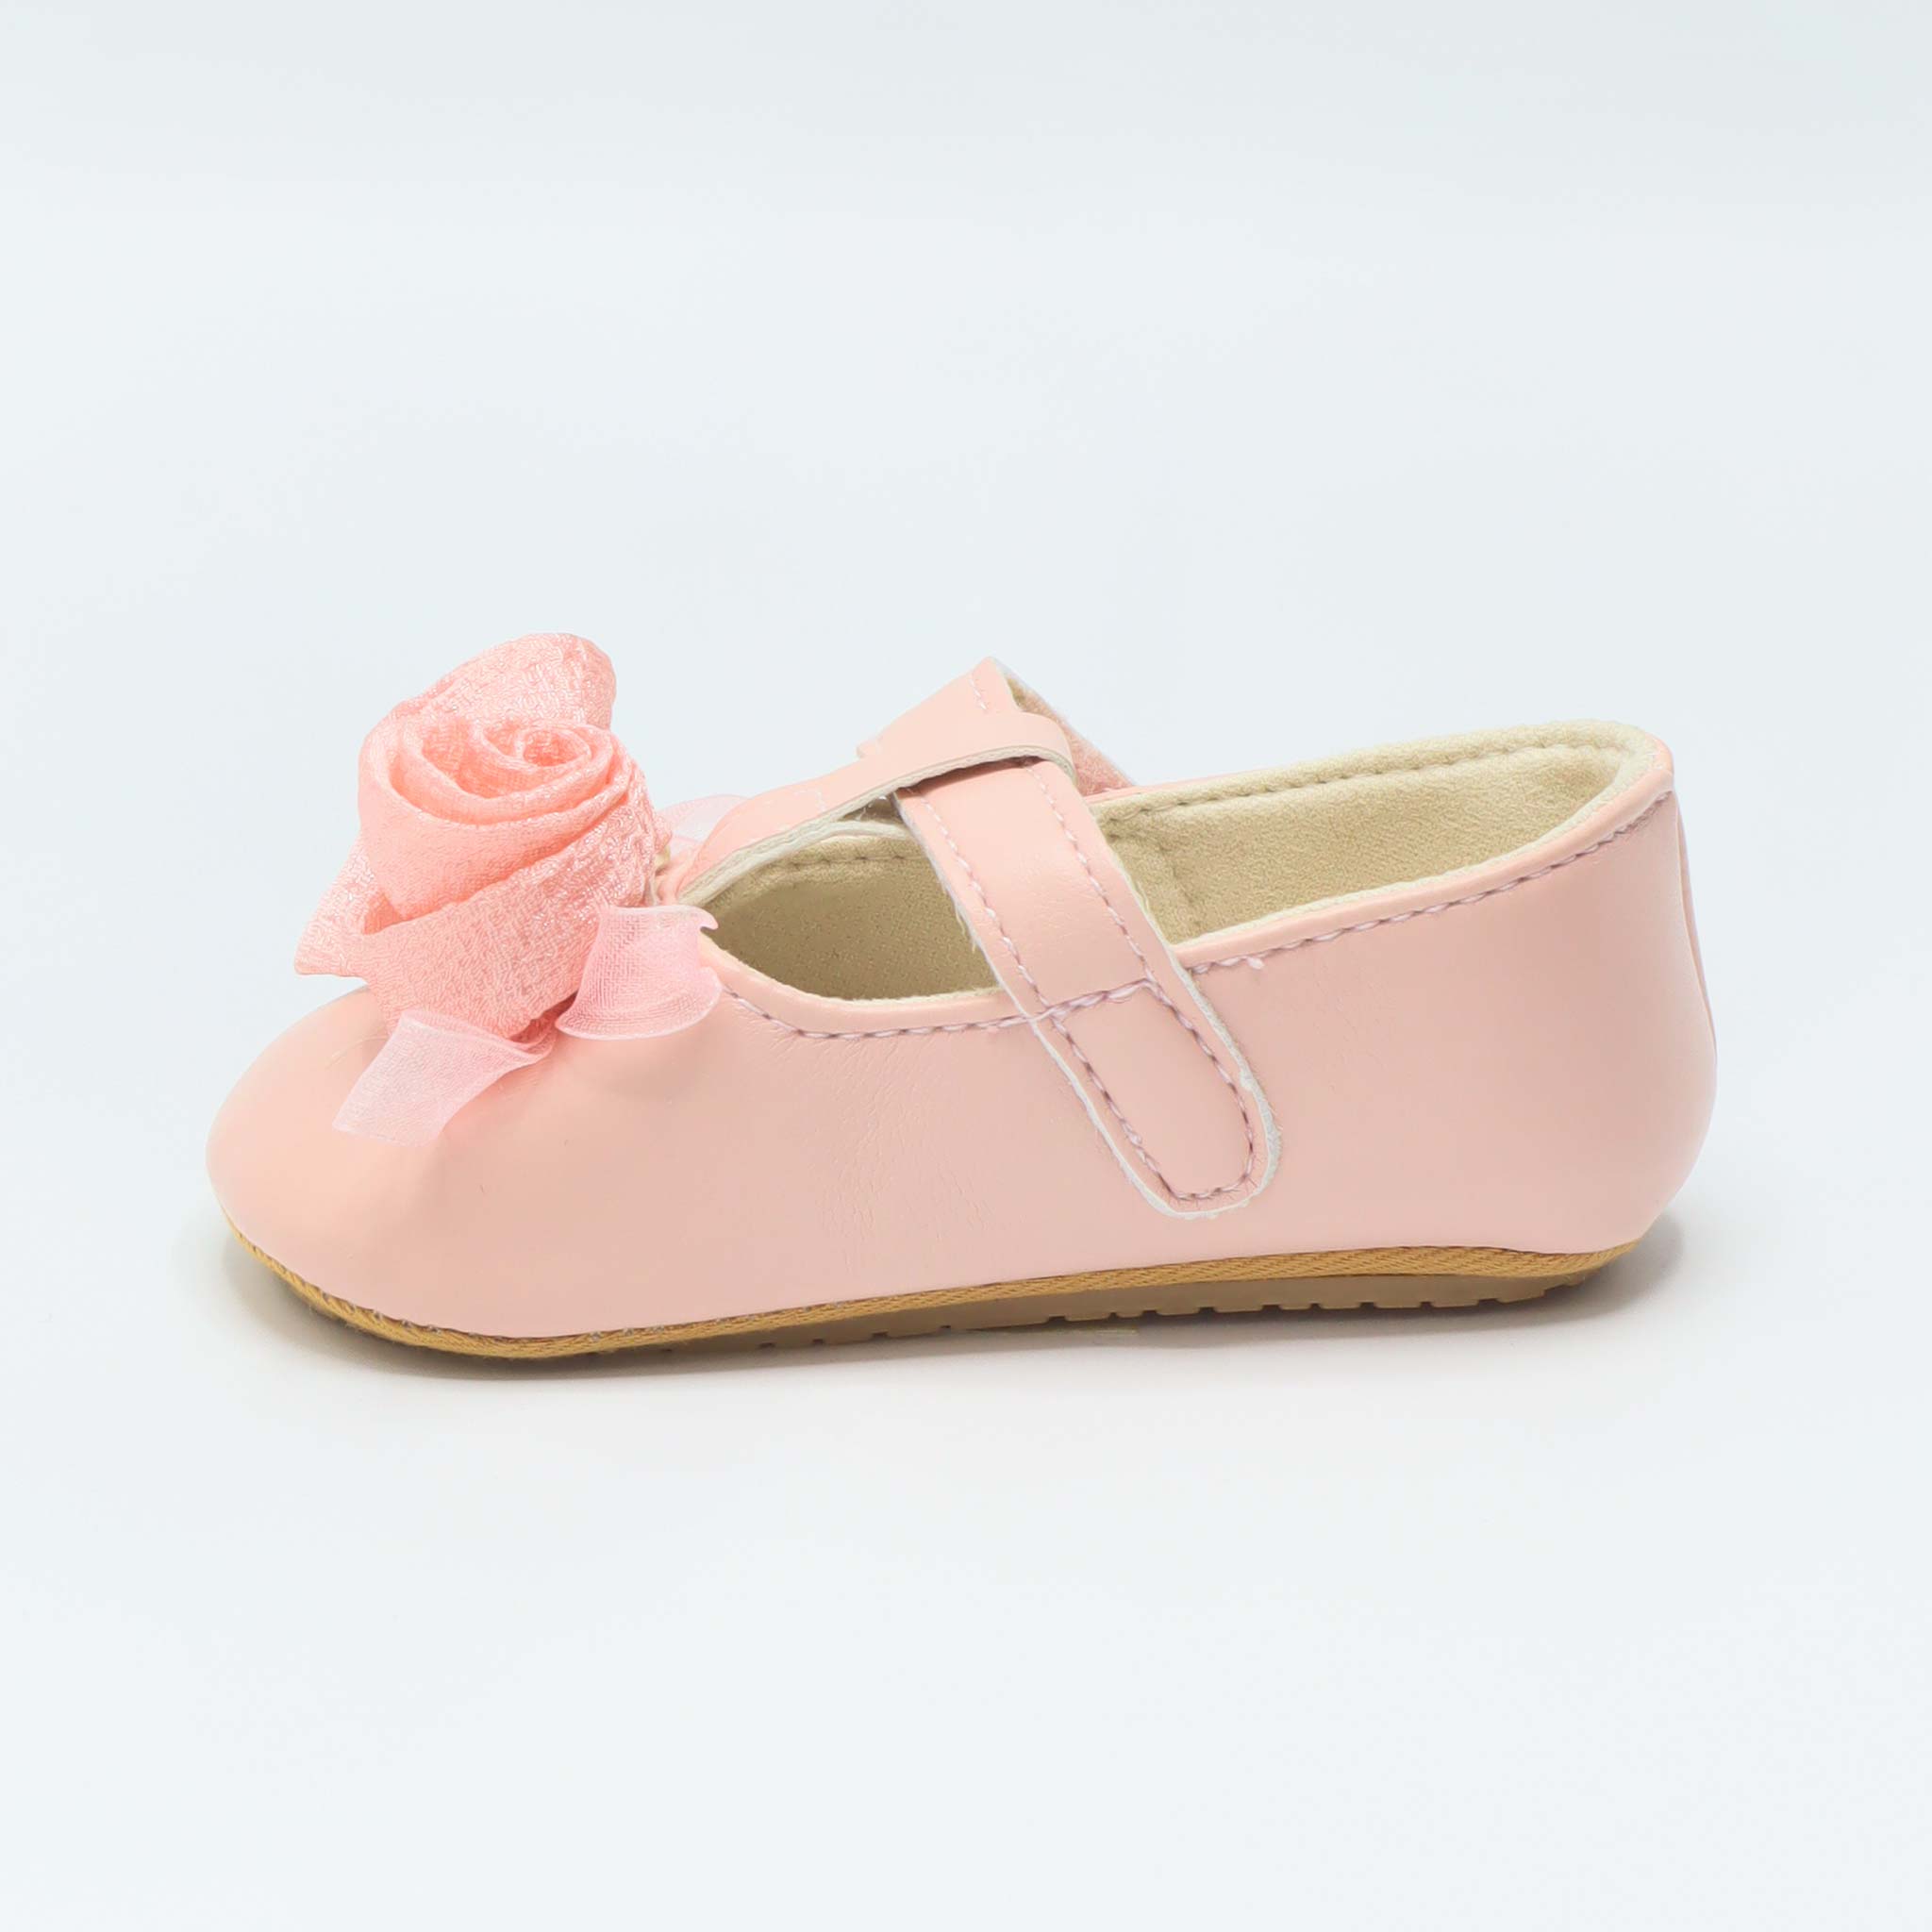 Baby Shoes Pink Color With Bow